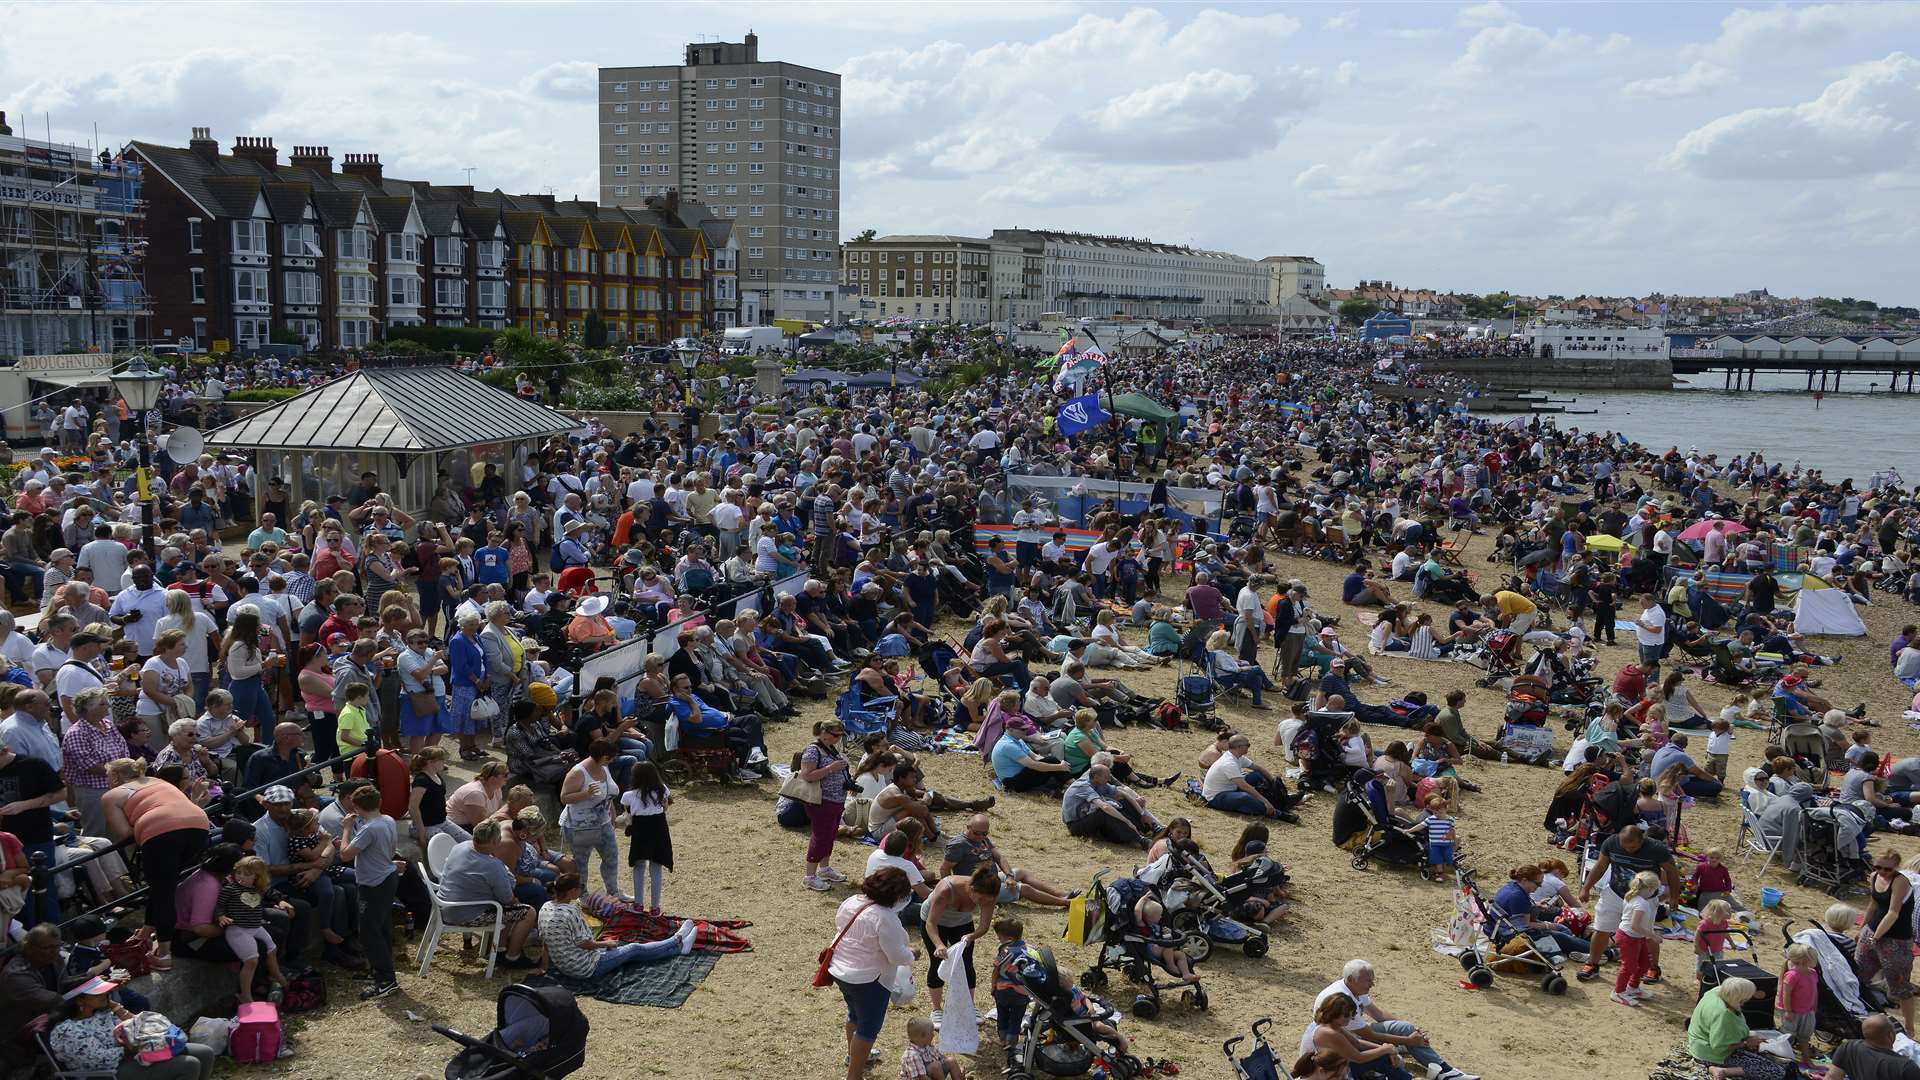 Last year 70,000 people lined the seafront. Picture: Paul Amos